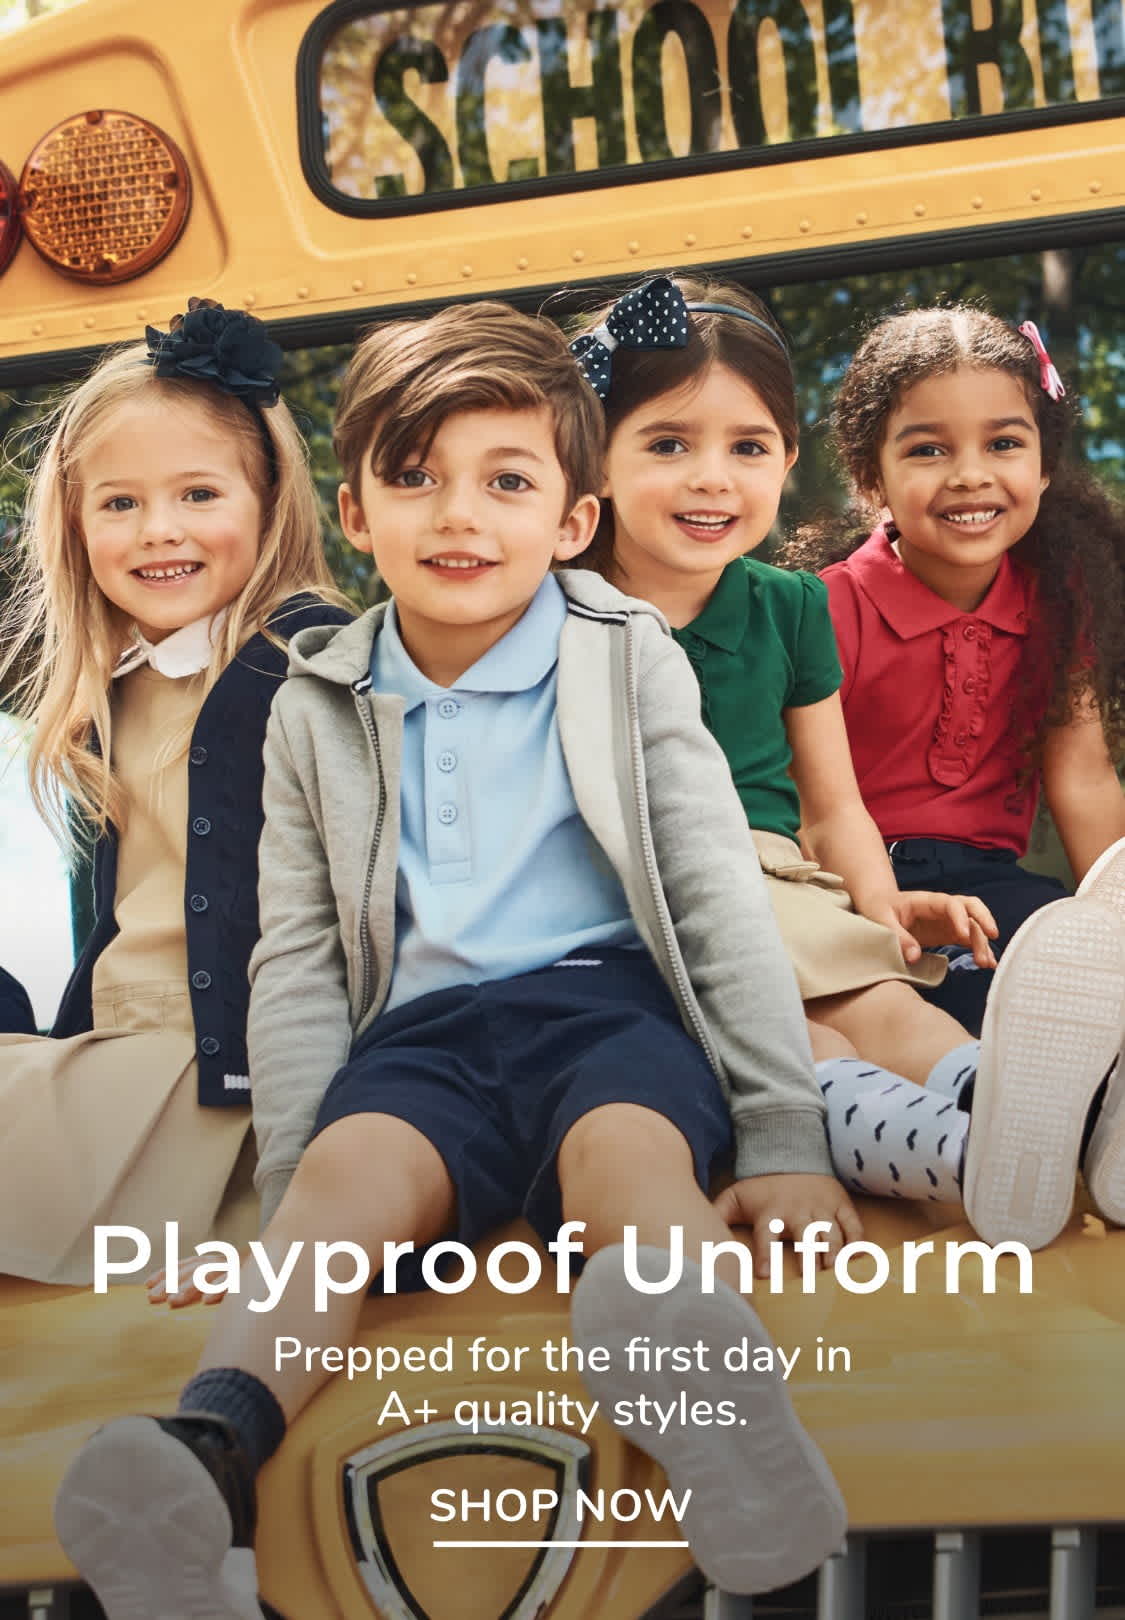 Playproof Uniform Prepped for the first day in A+ quality styles.